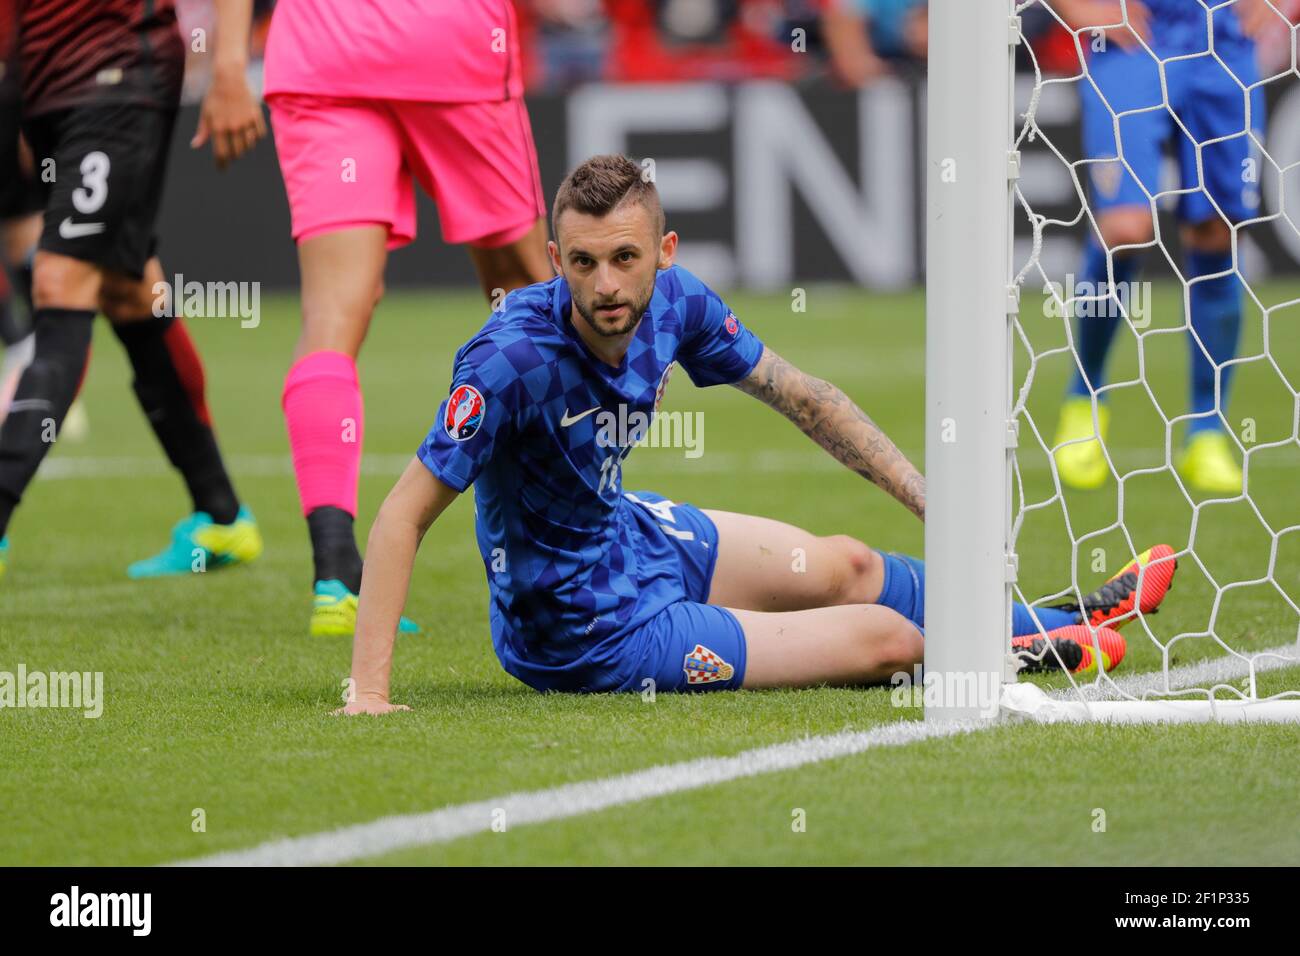 Marcelo Brozovic Cro Missed To Scored A New Goal During The Uefa Euro 16 Group D Football Match Between Turkey And Croatia On June 12 16 At Parc Des Princes Stadium In